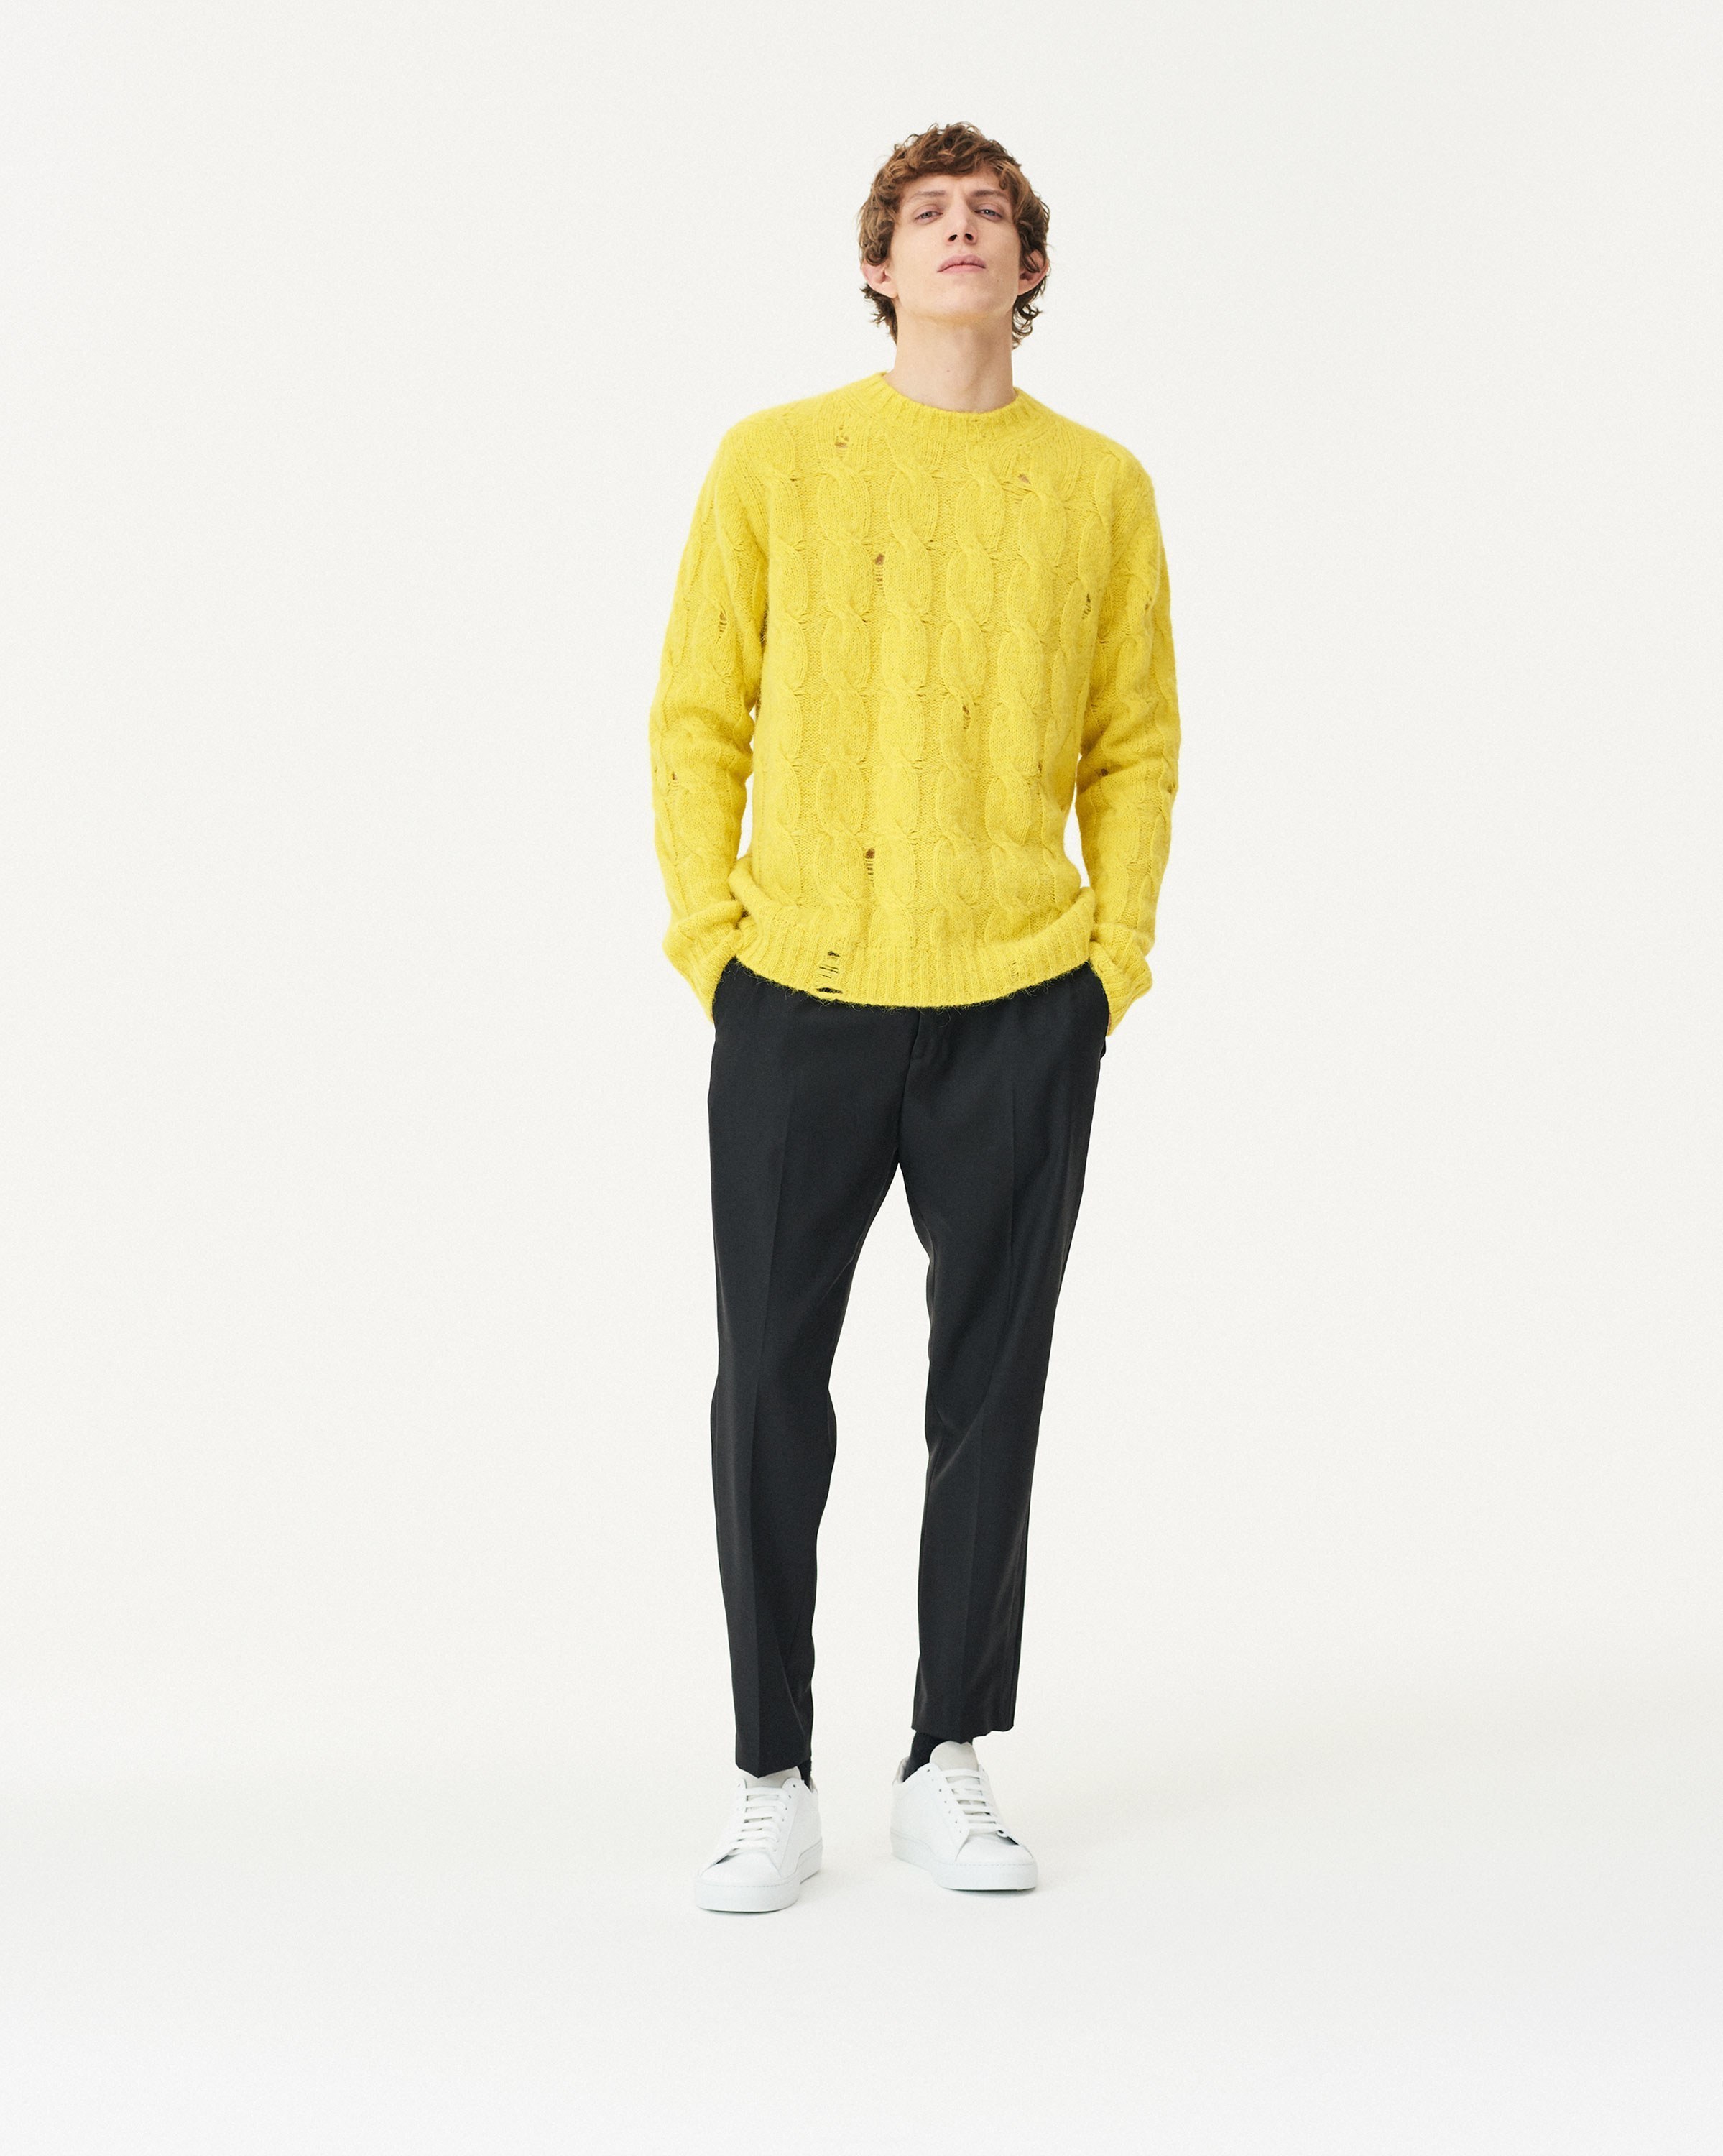 How to Wear a Yellow Sweater (83 looks) | Men's Fashion